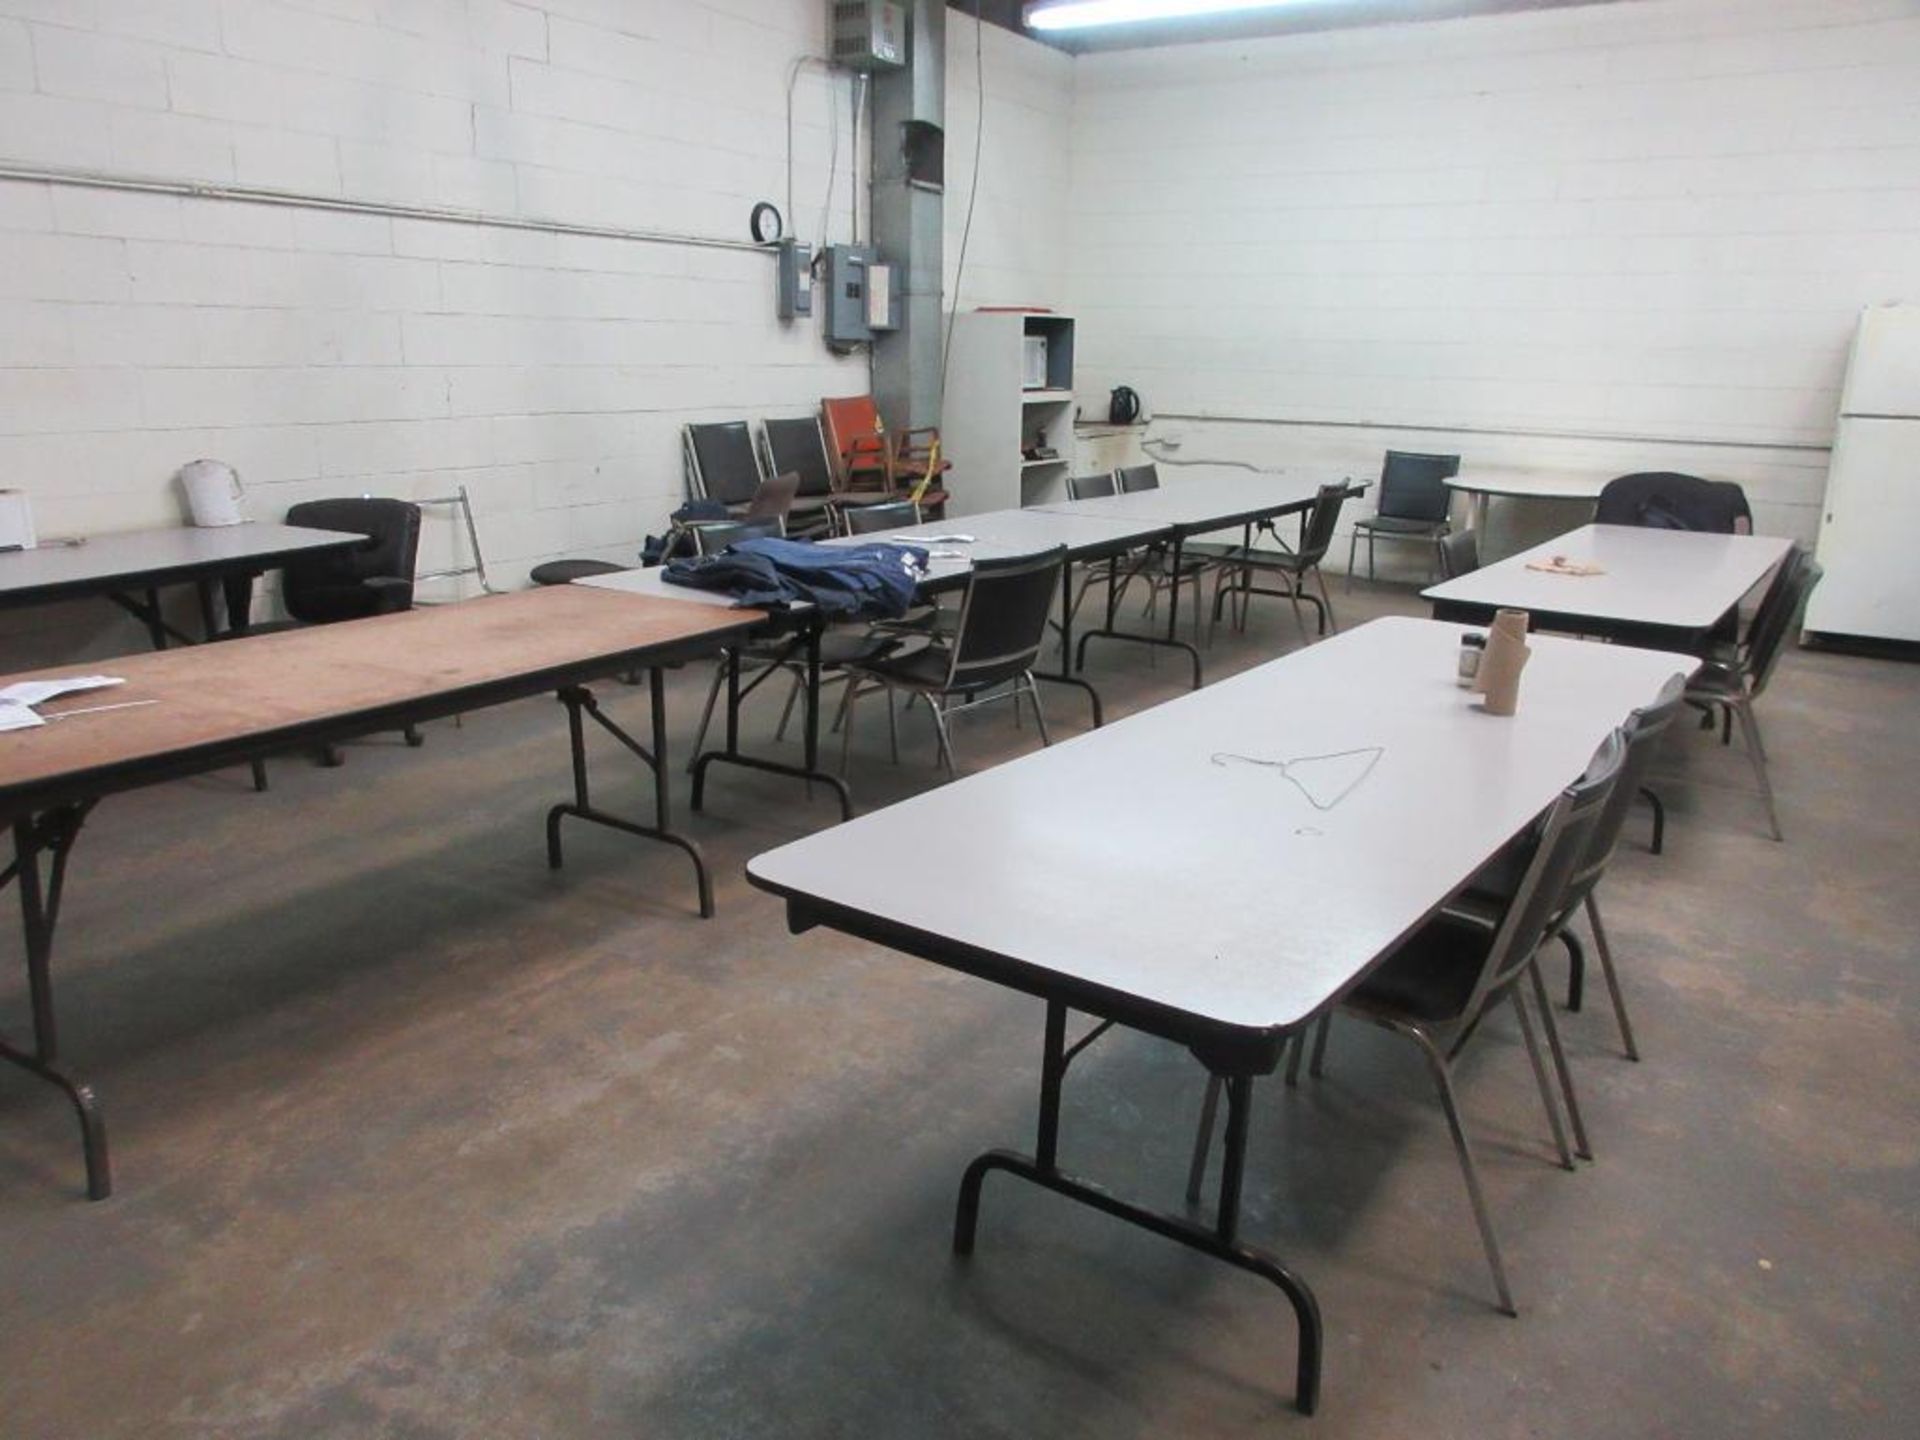 REMAINING CONTENTS OF EMPLOYEE BREAK AREA INCL FOLDING TABLES, STACKABLE CHAIRS, MICROWAVES, FRIDGES